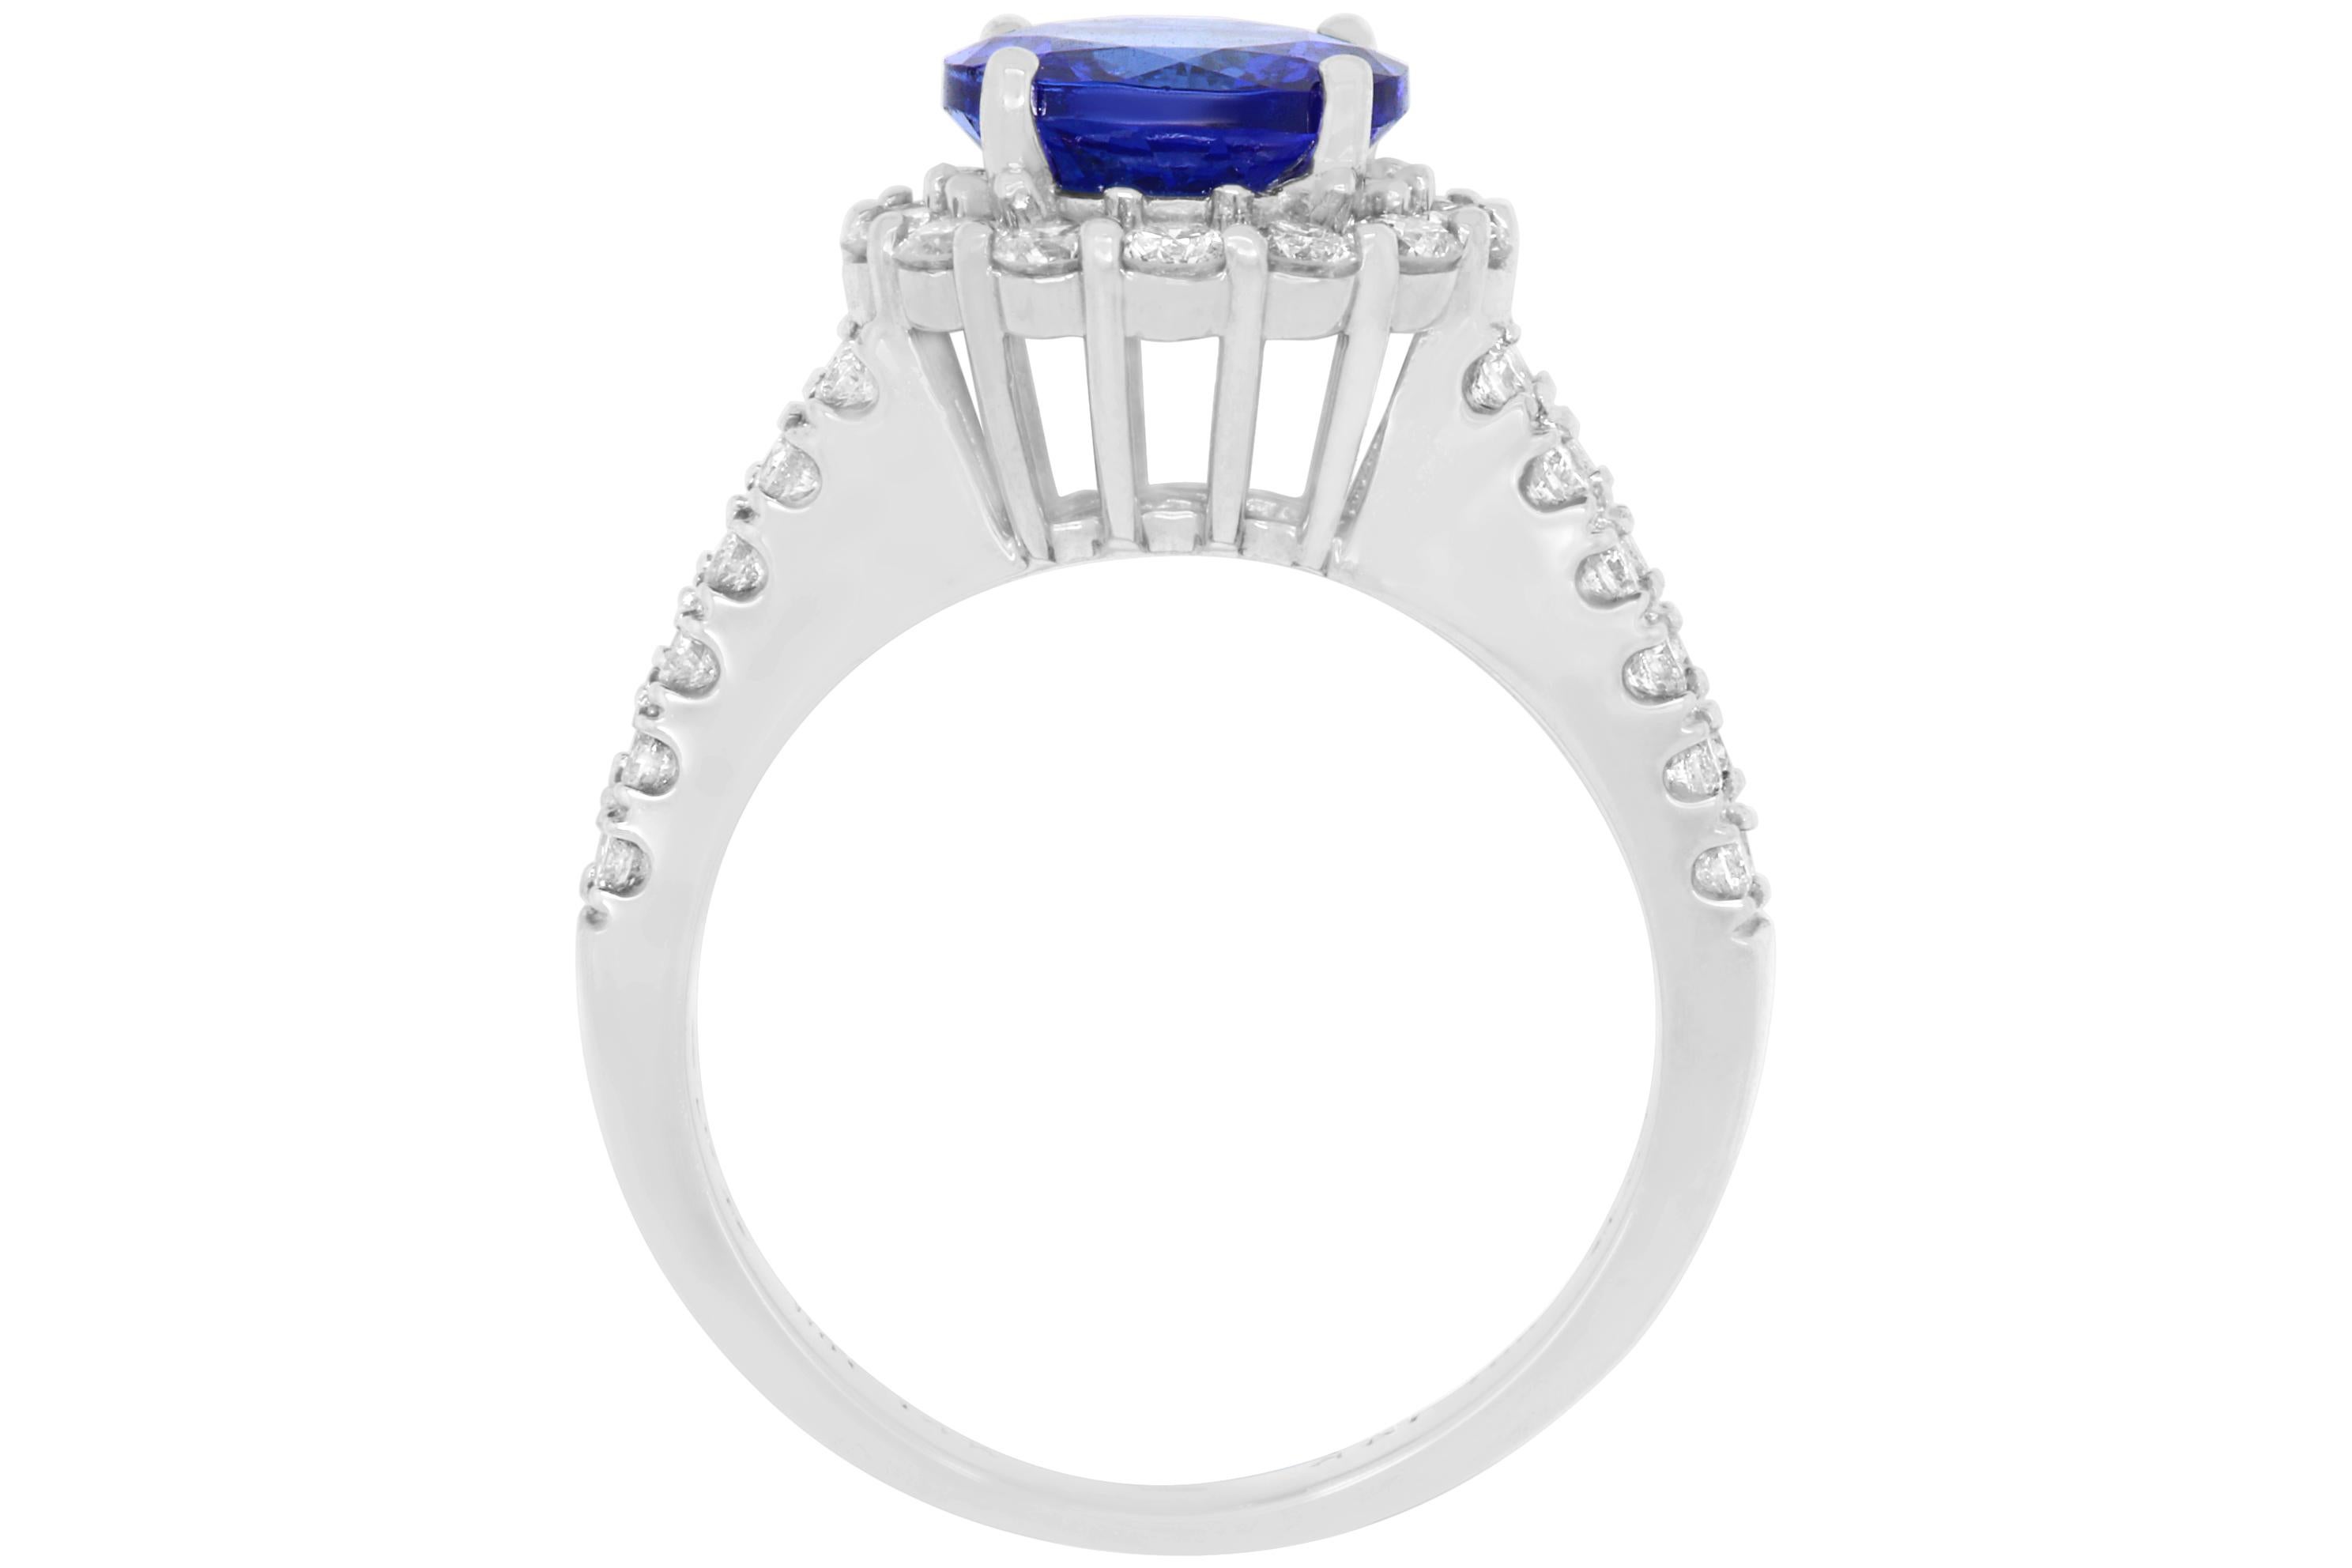 A truly stunning piece, this 2.09 Carat Round Tanzanite shines. Surrounded by brilliant white diamonds and a 14K White Gold dual band, this is a piece to treasure for years to come! 

Material: 14k White Gold 
Center Stone Details: 2.09 Carat Round